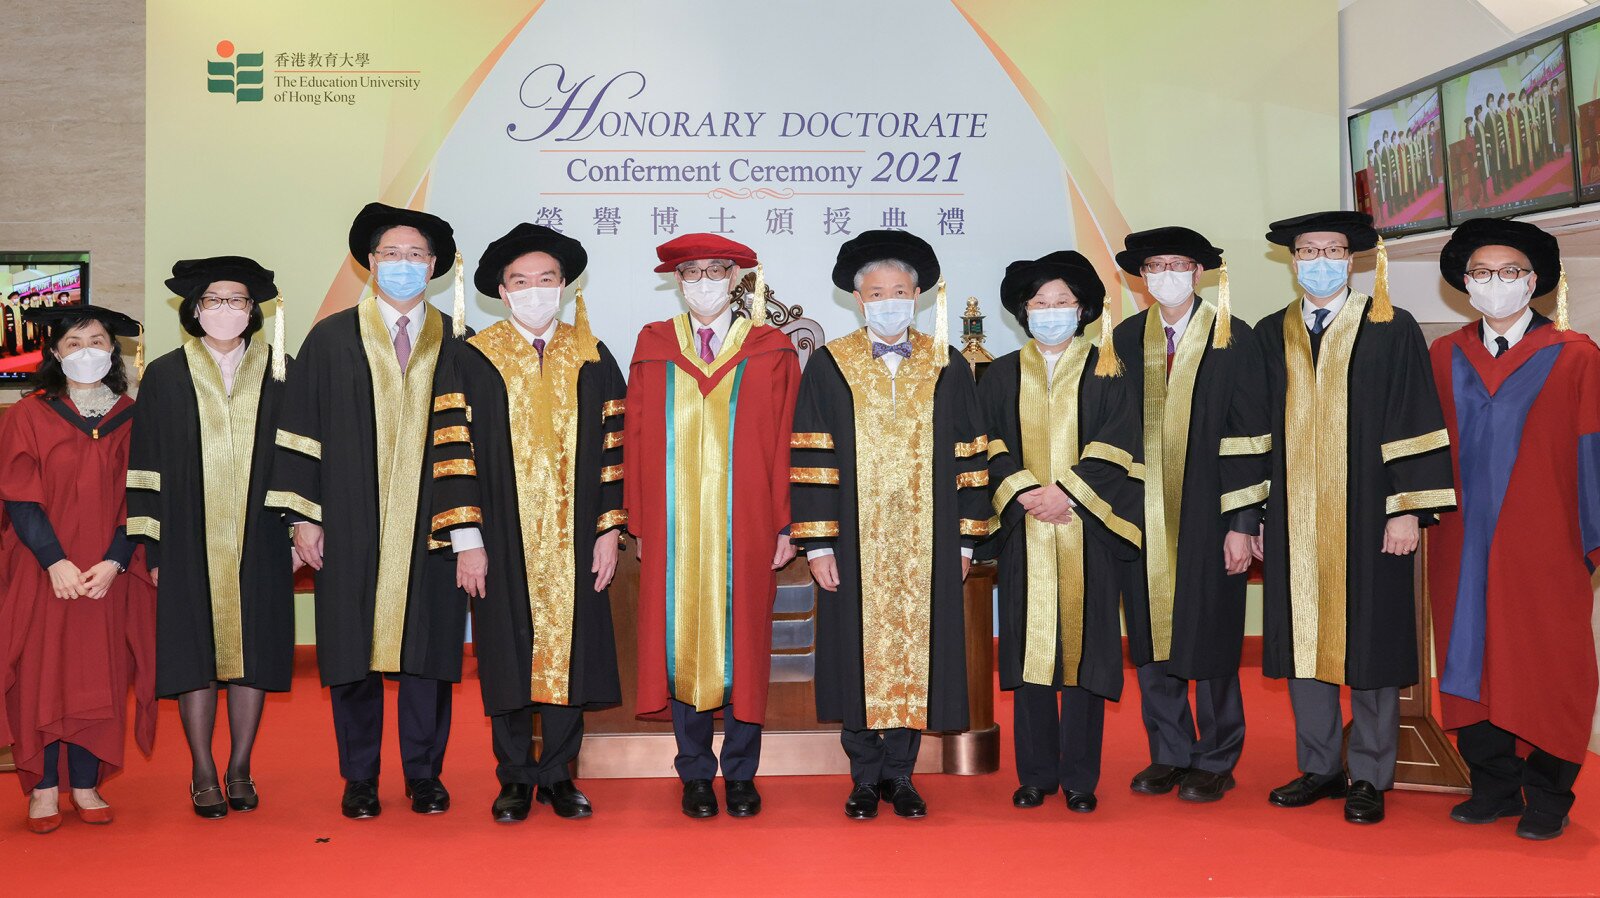 Honorary Doctorate Conferment Ceremony (2021)